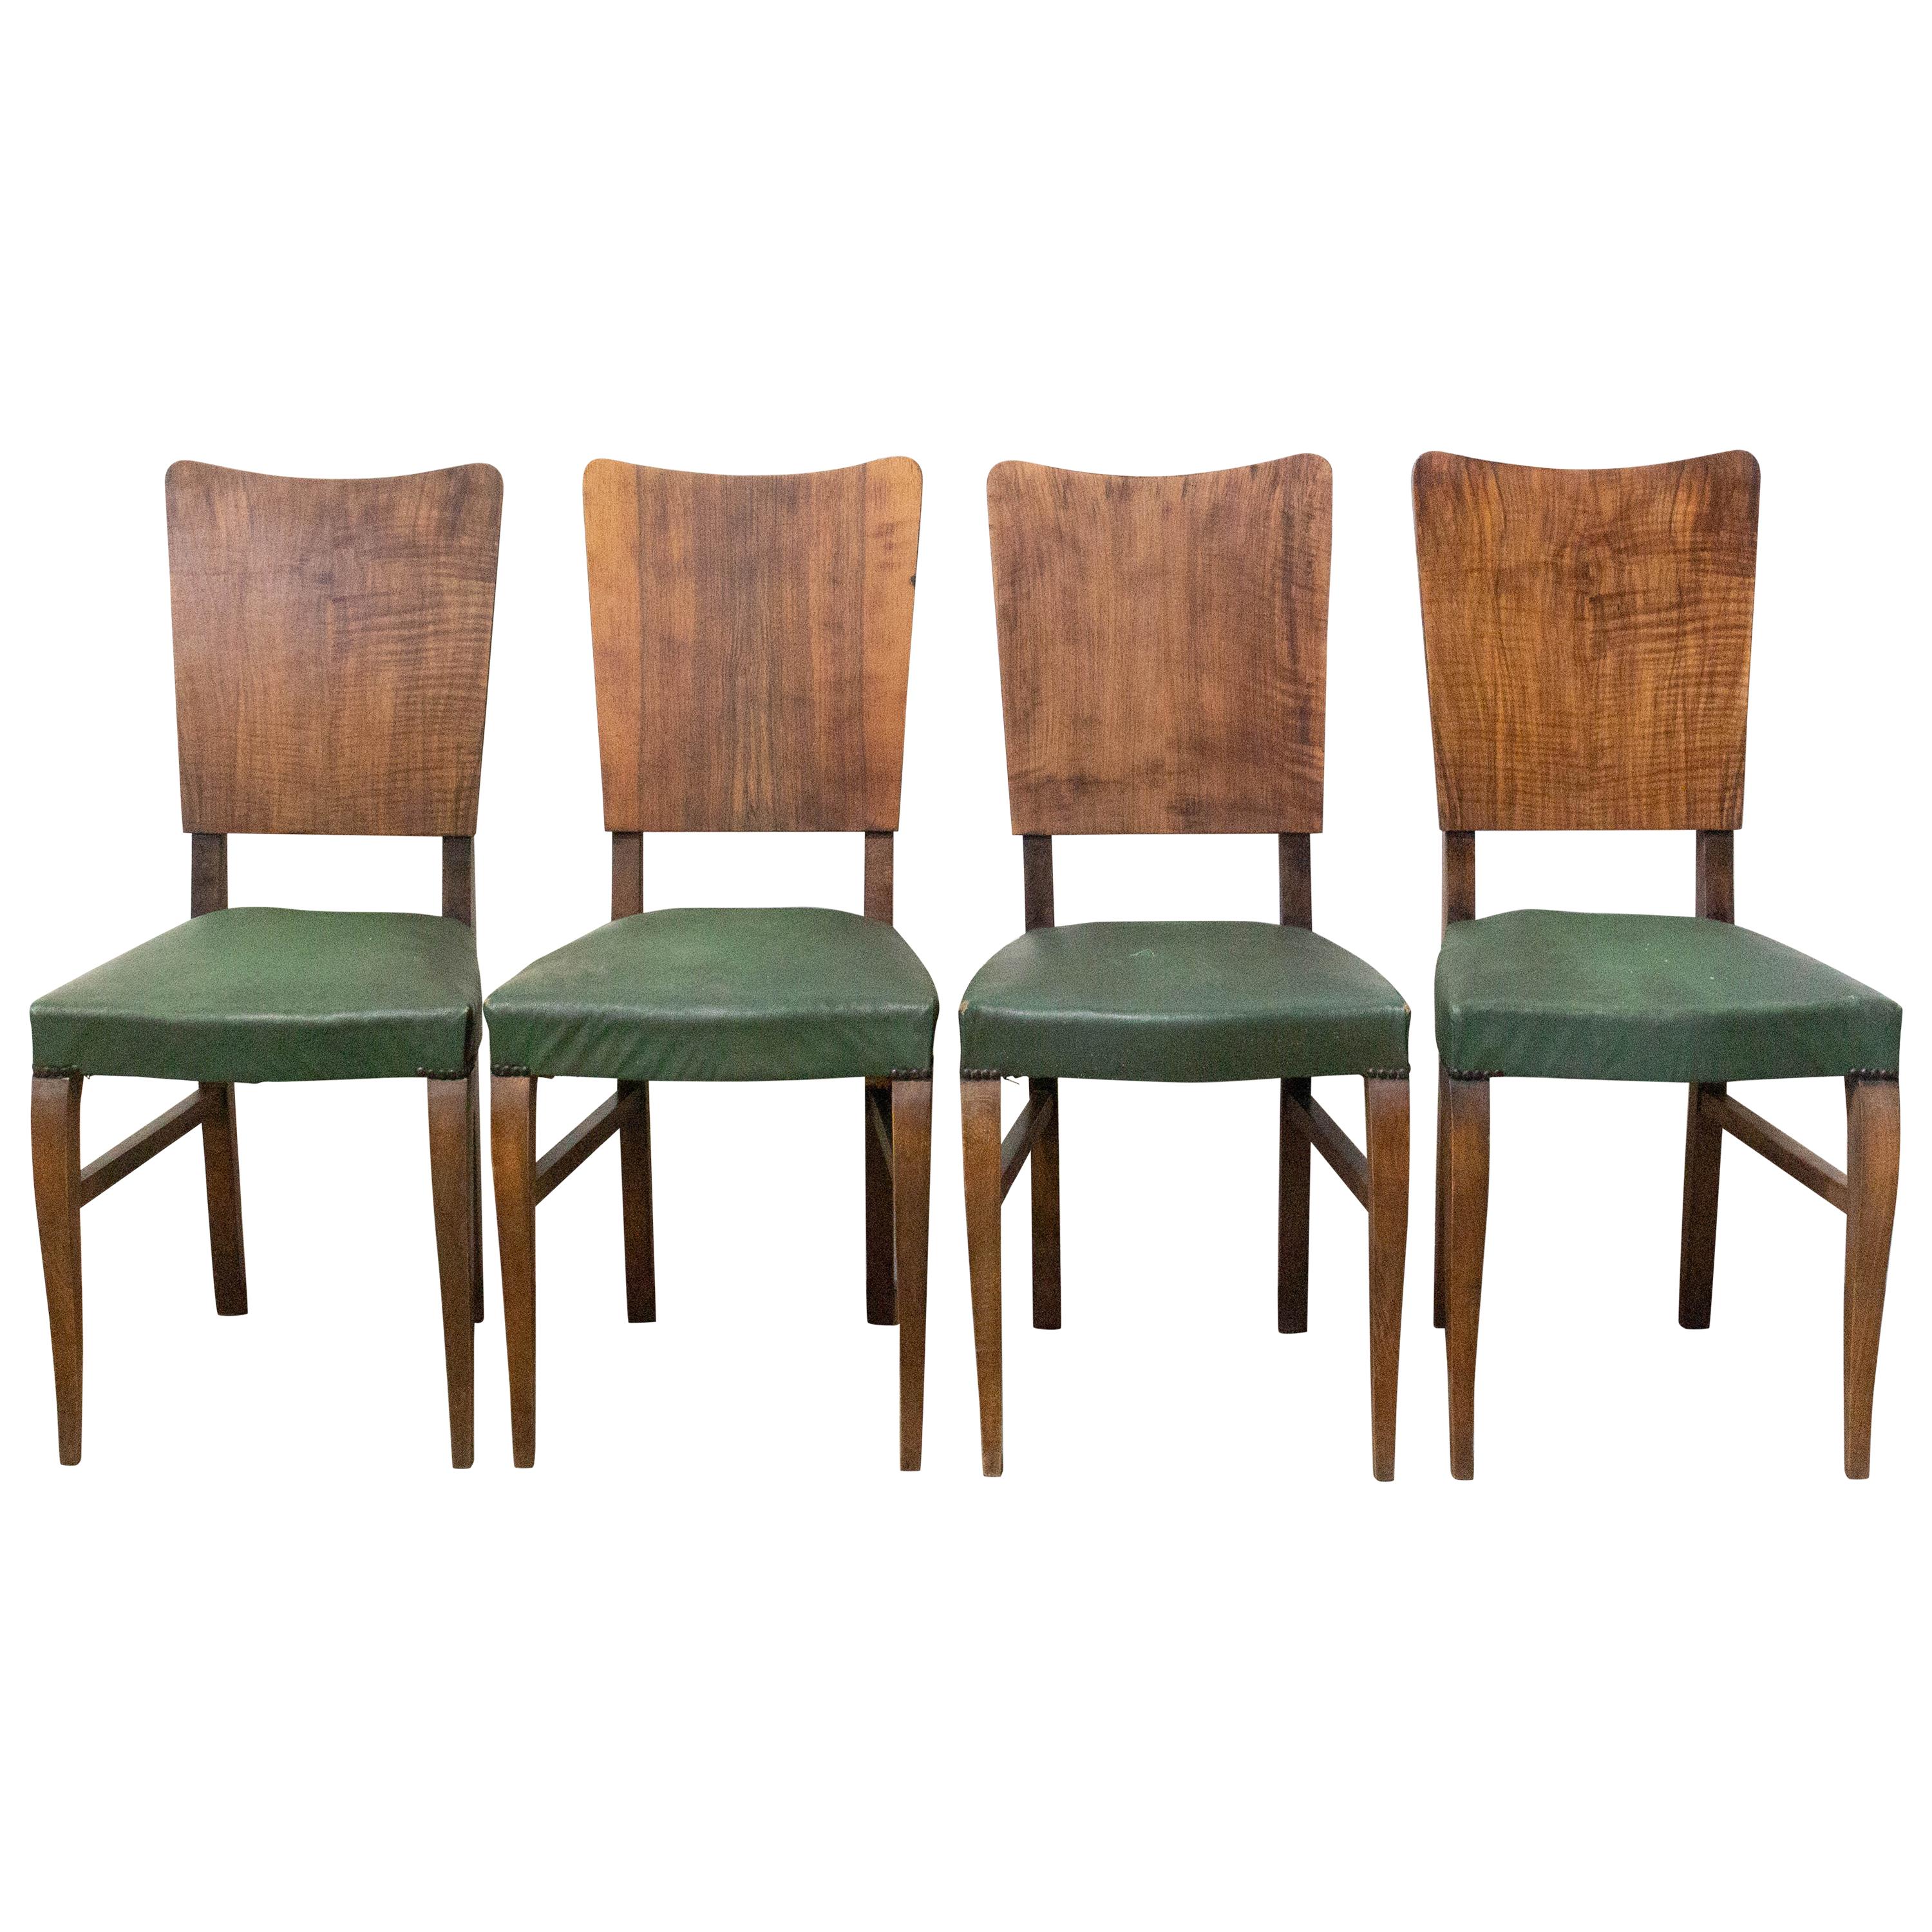 Four Vintage Dining Chairs to Be Re-Upholstered, French, circa 1950 For Sale